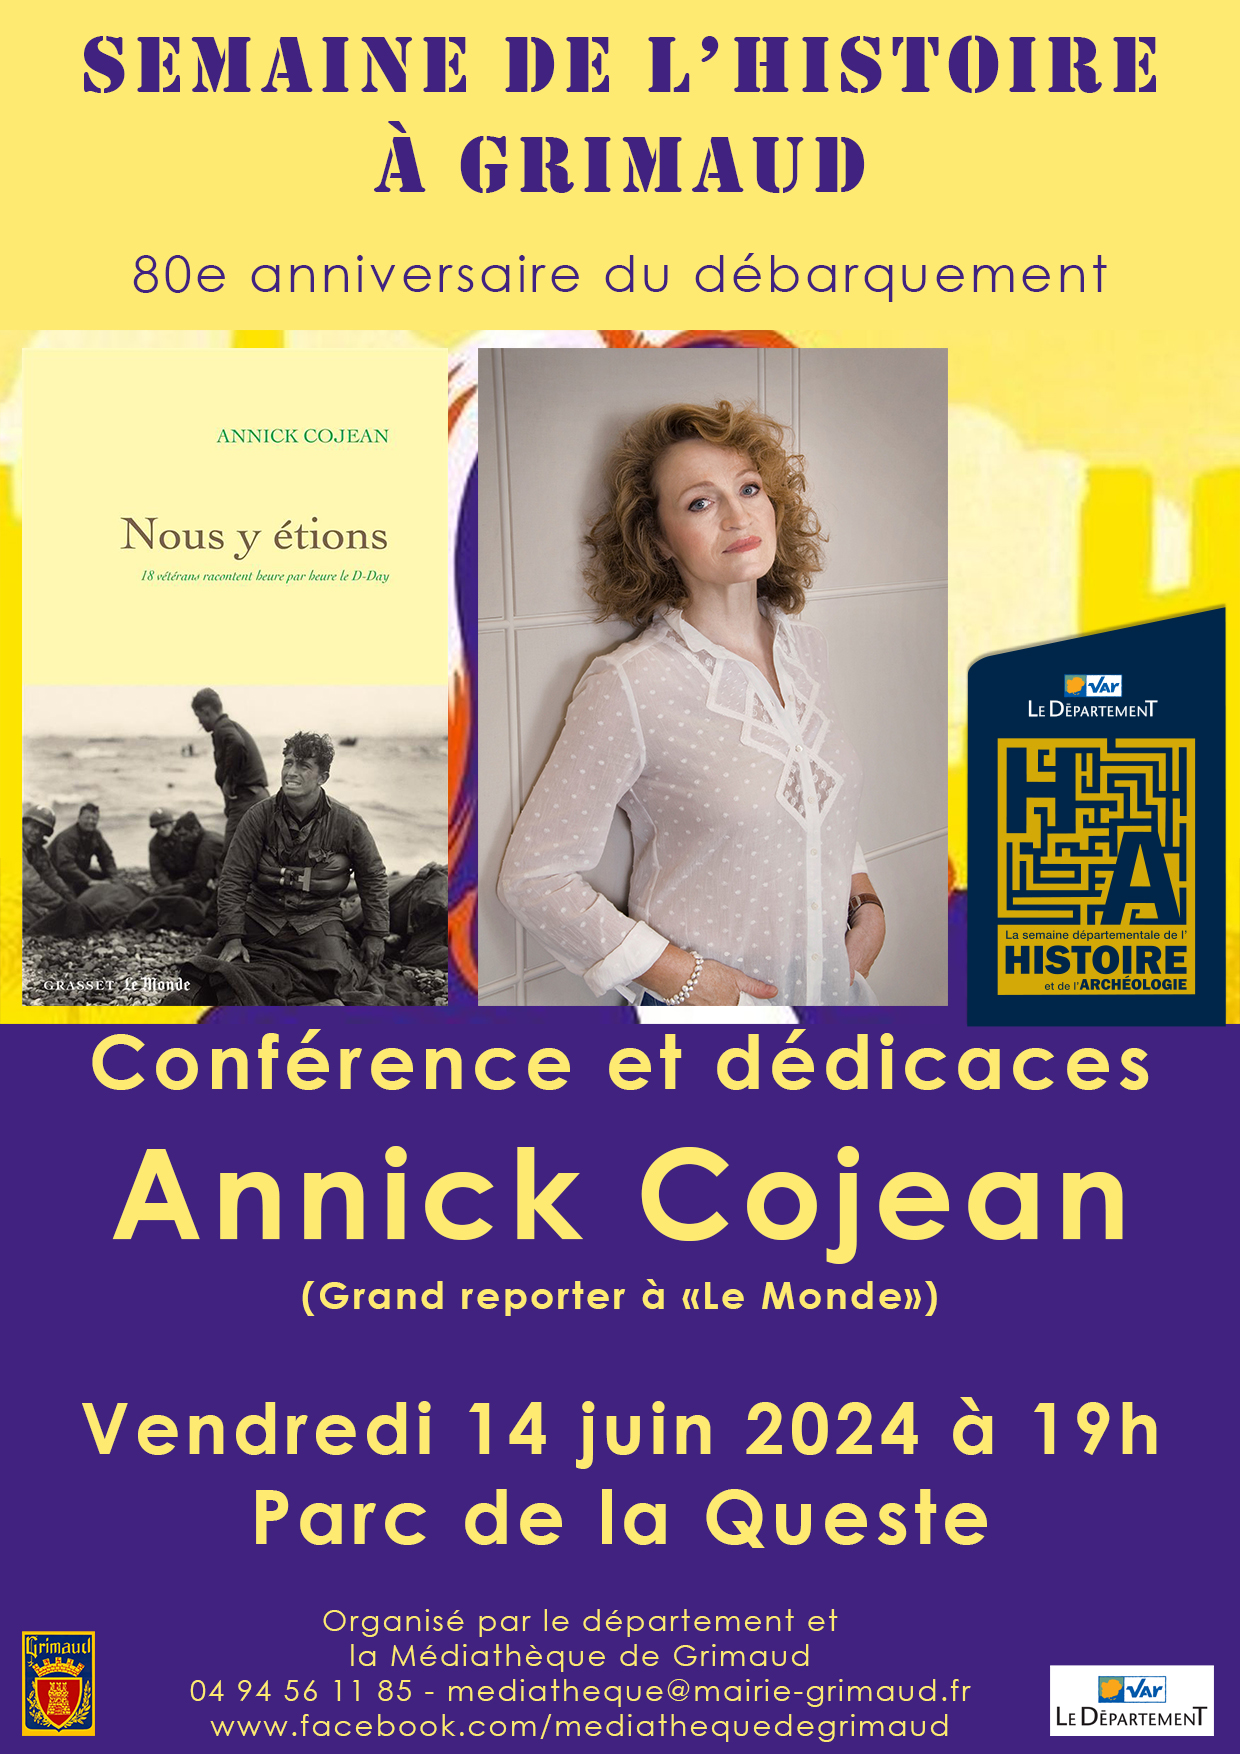 Friday June 14, 2024 - Literary conference with Annick COJEAN